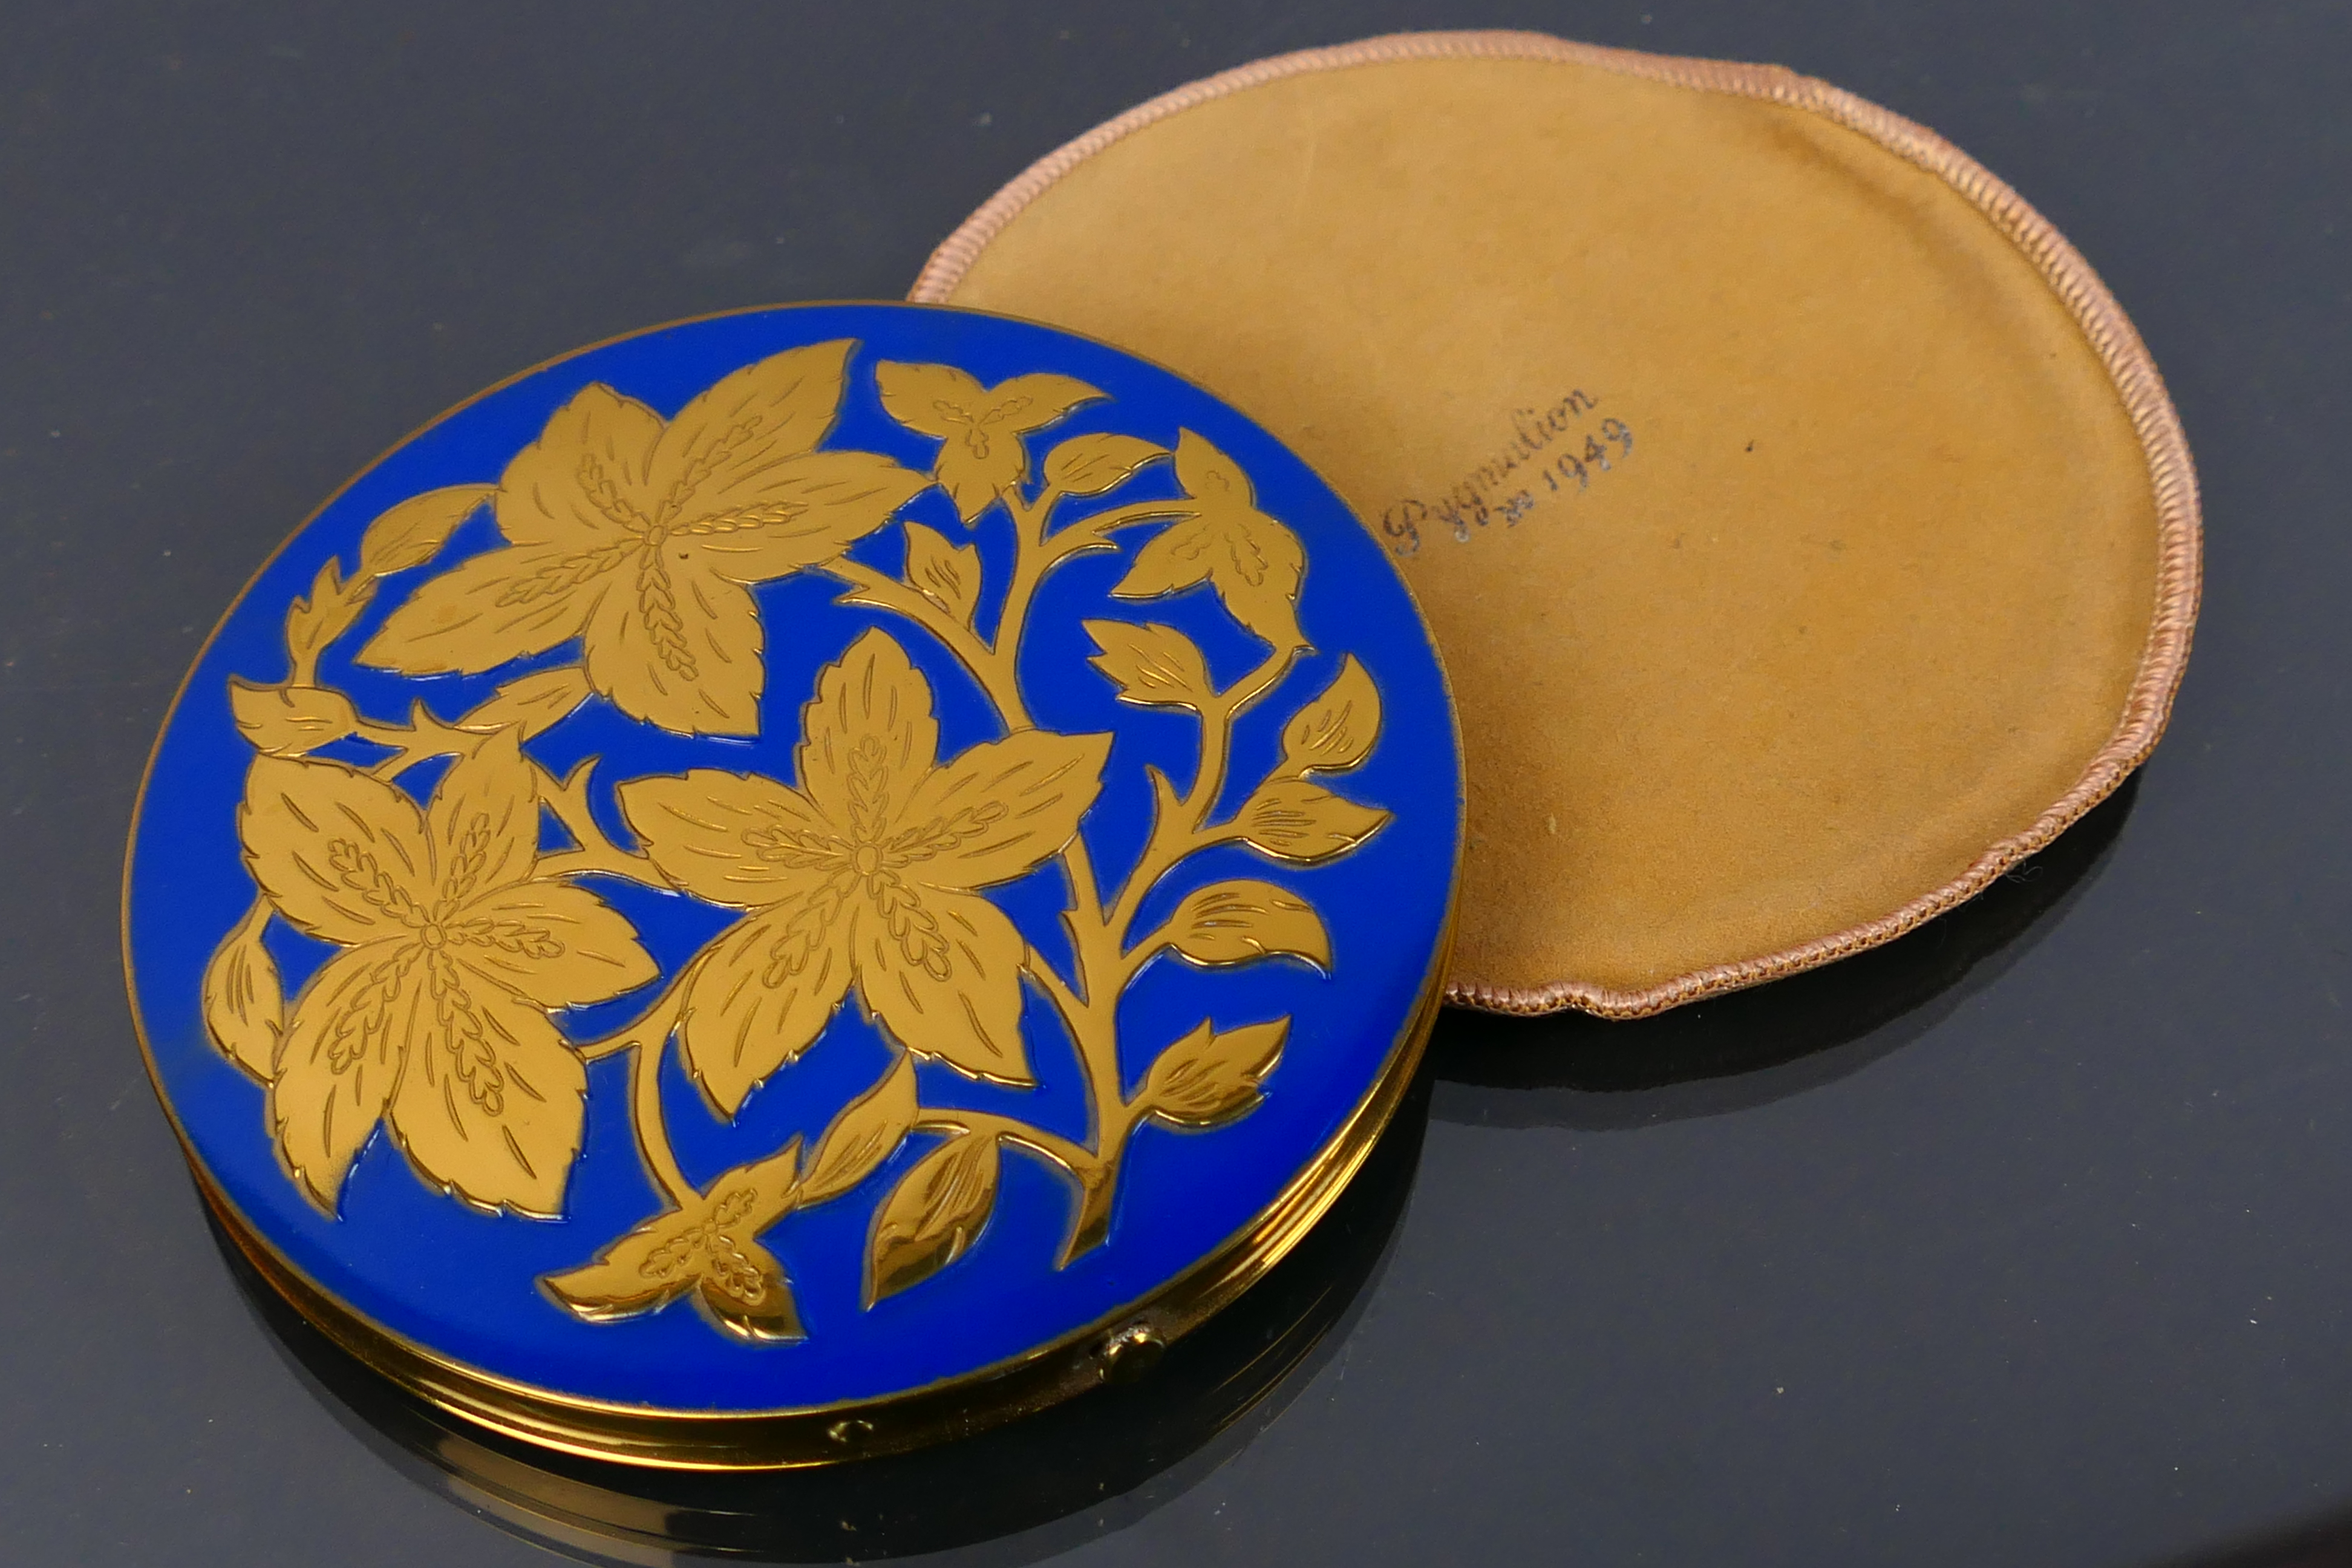 A boxed vintage Pygmalion 1949 gilt metal and enamel powder compact. Made in England.